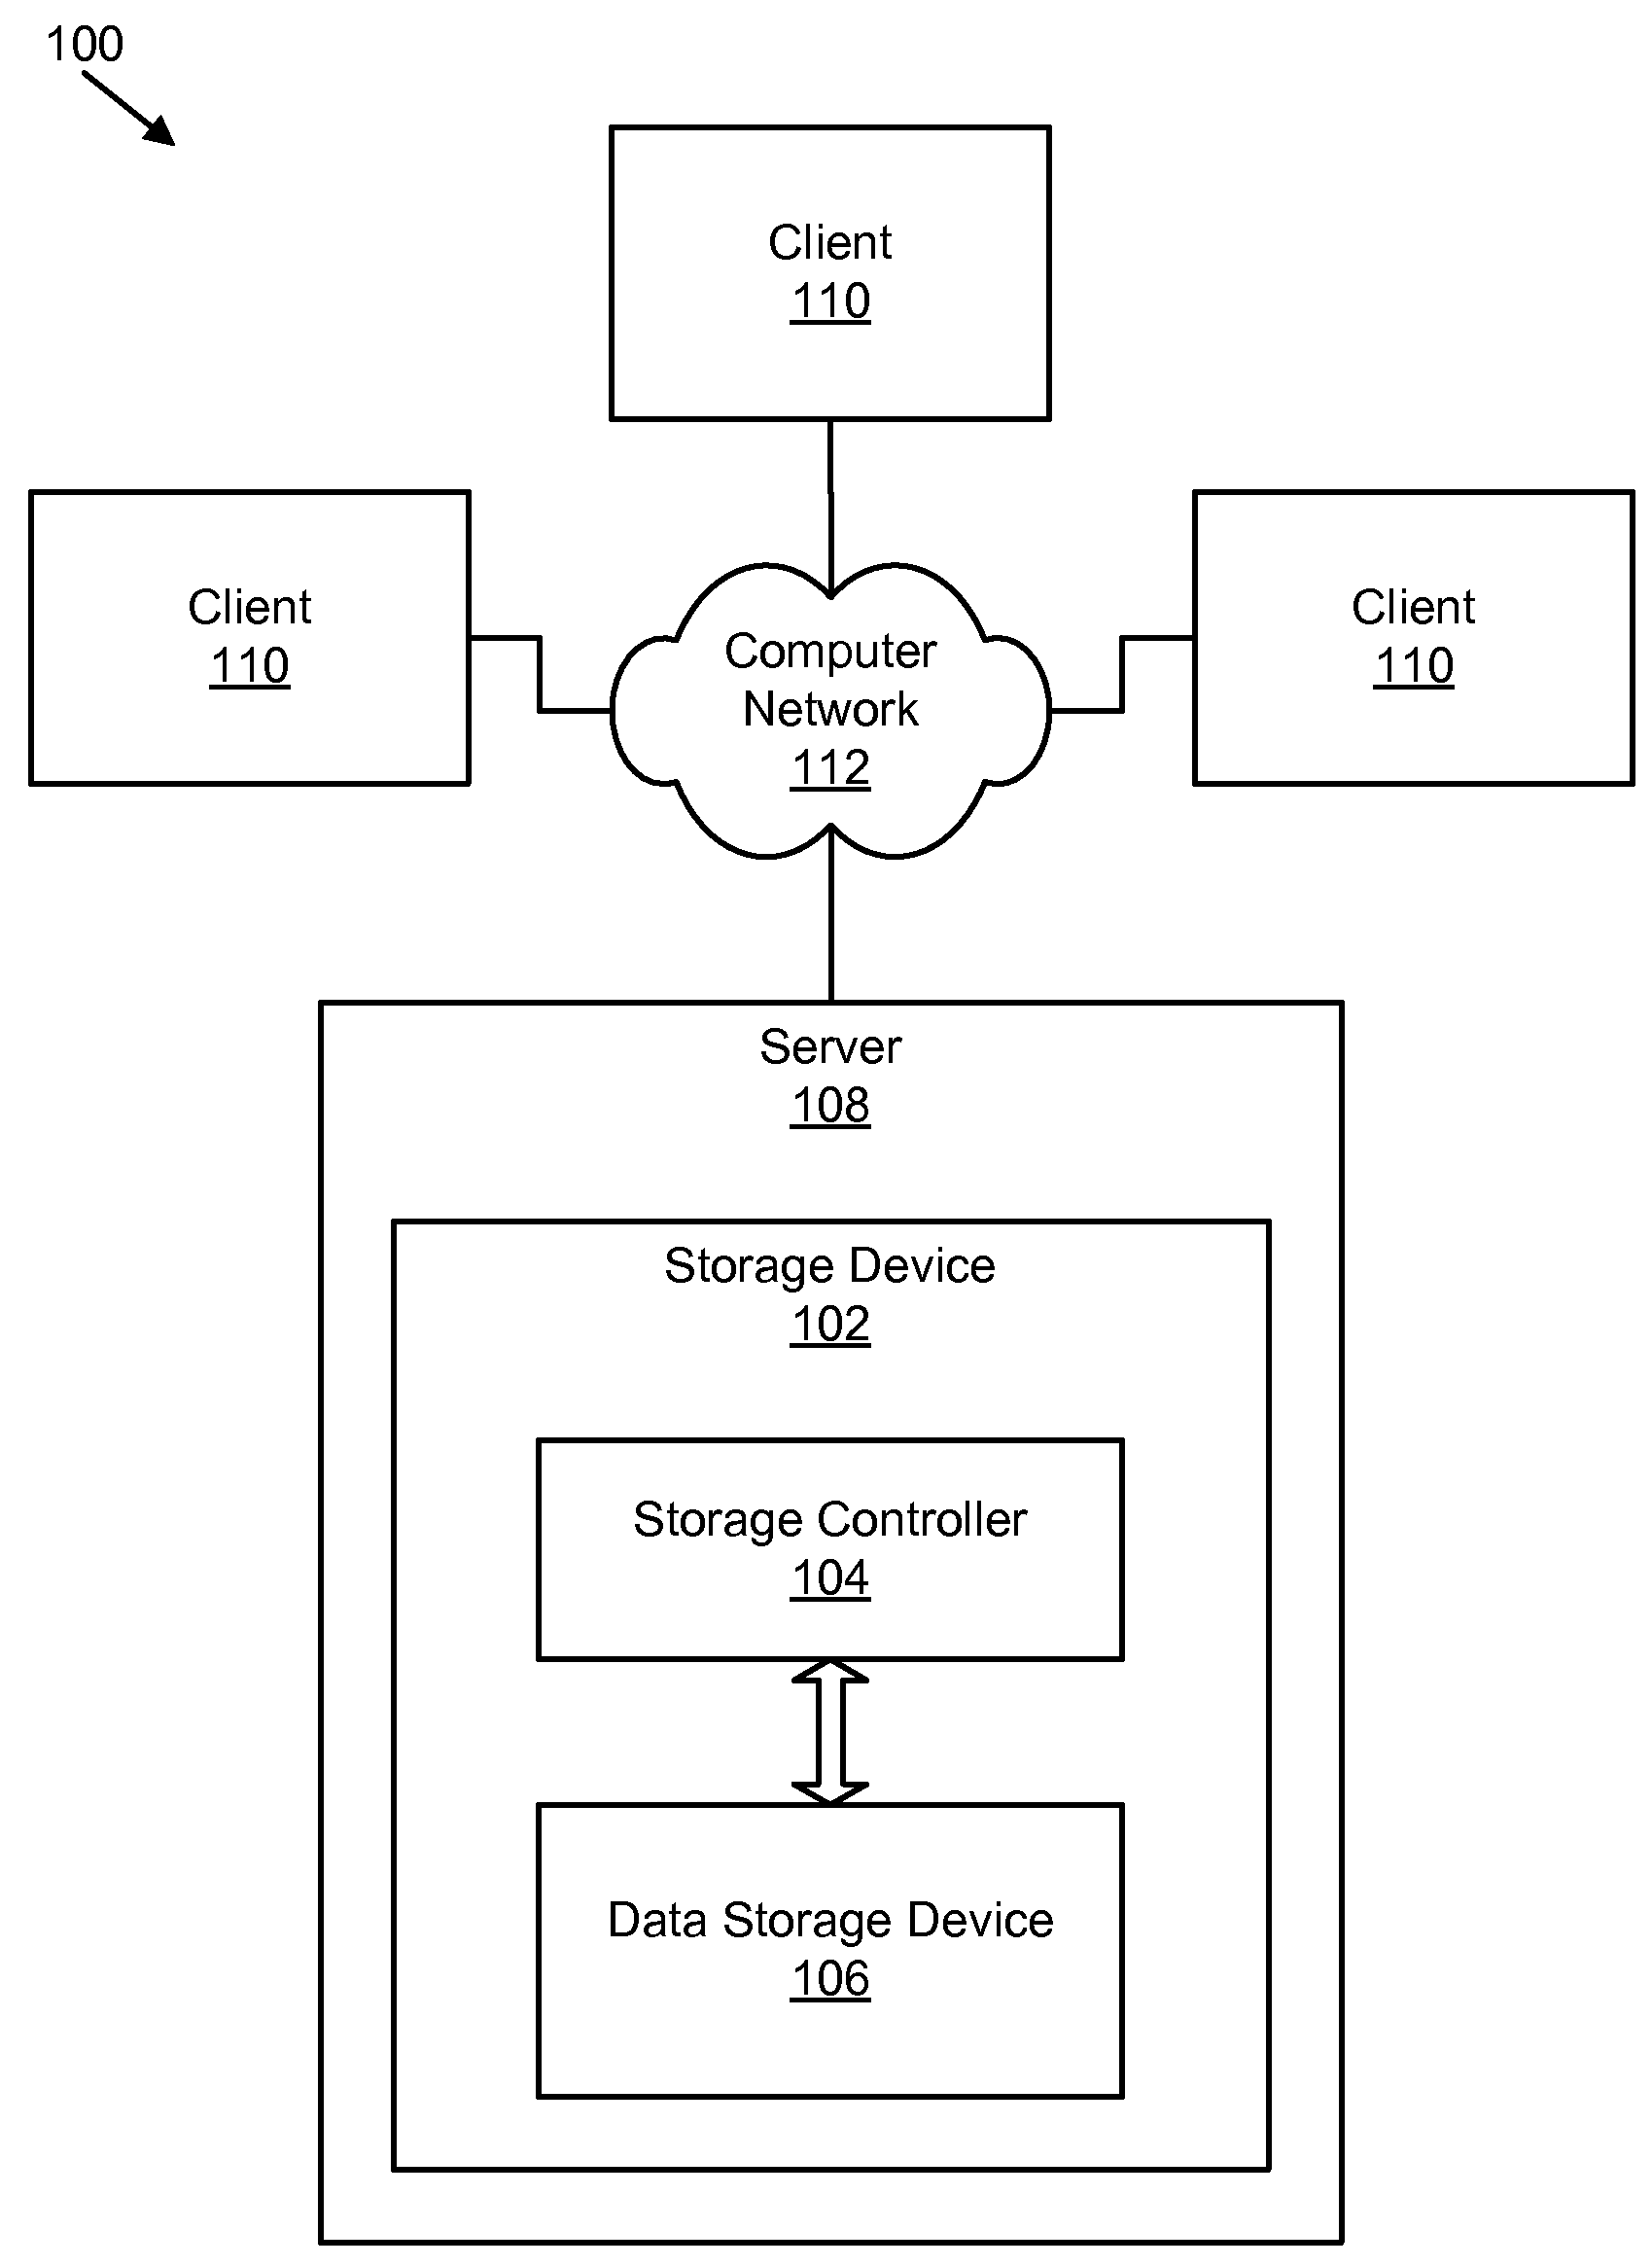 Apparatus, system, and method for converting a storage request into an append data storage command